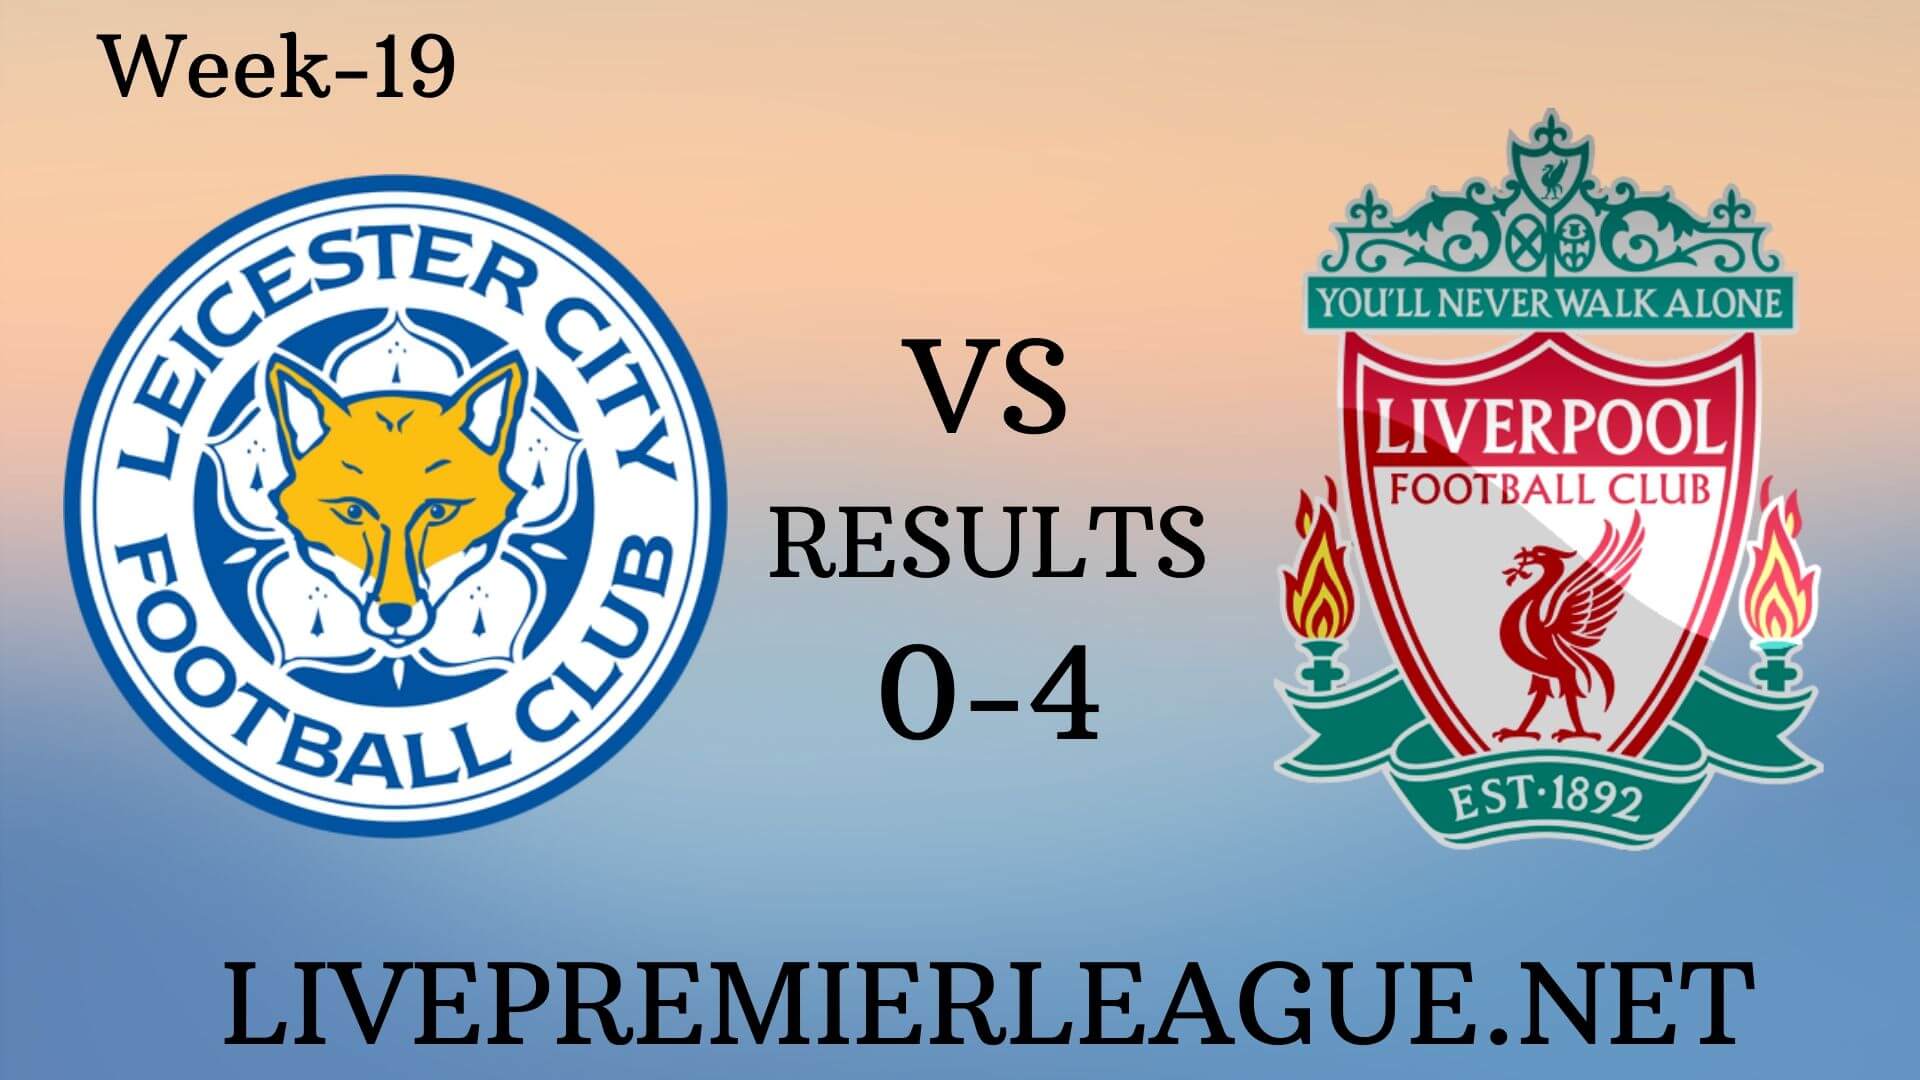 Leicester City Vs Liverpool | Week 19 Result 2019